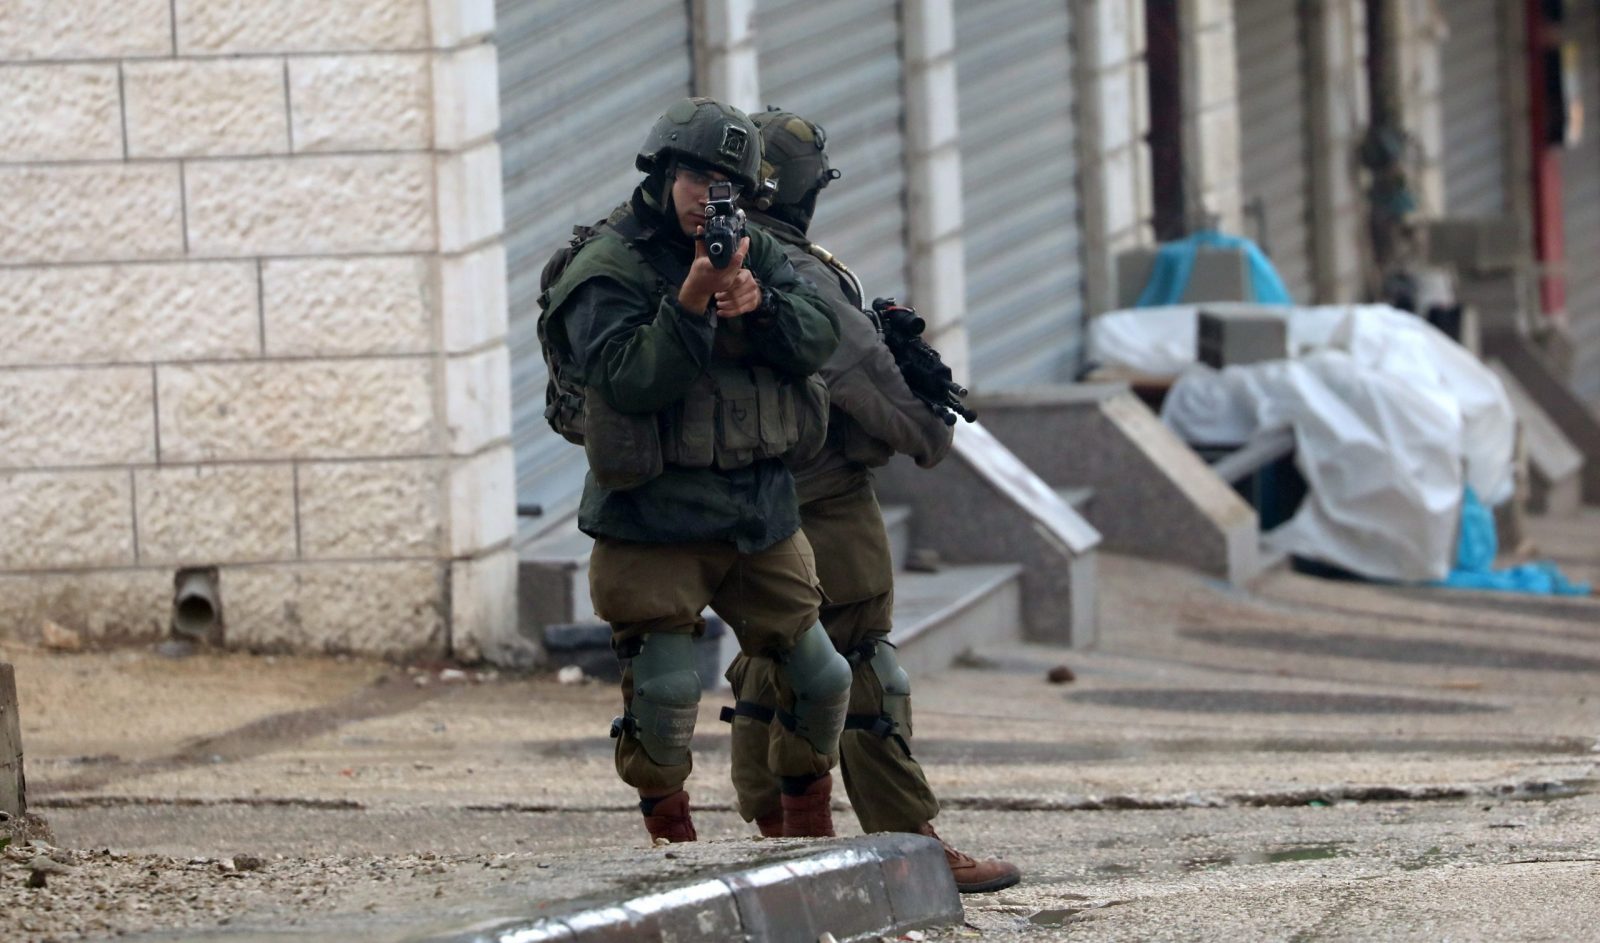 epa10532437 Israeli soldiers stop a Palestinian man in the area following a shooting attack in the West Bank town of Hawara, near the city of Nablus, 19 March 2023. The Israeli Army said on 19  March that they blocked the area after an attacker opened fire towards an Israeli vehicle. Israeli officials said that two Israelis were wounded in the shooting.  EPA/ALAA BADARNEH